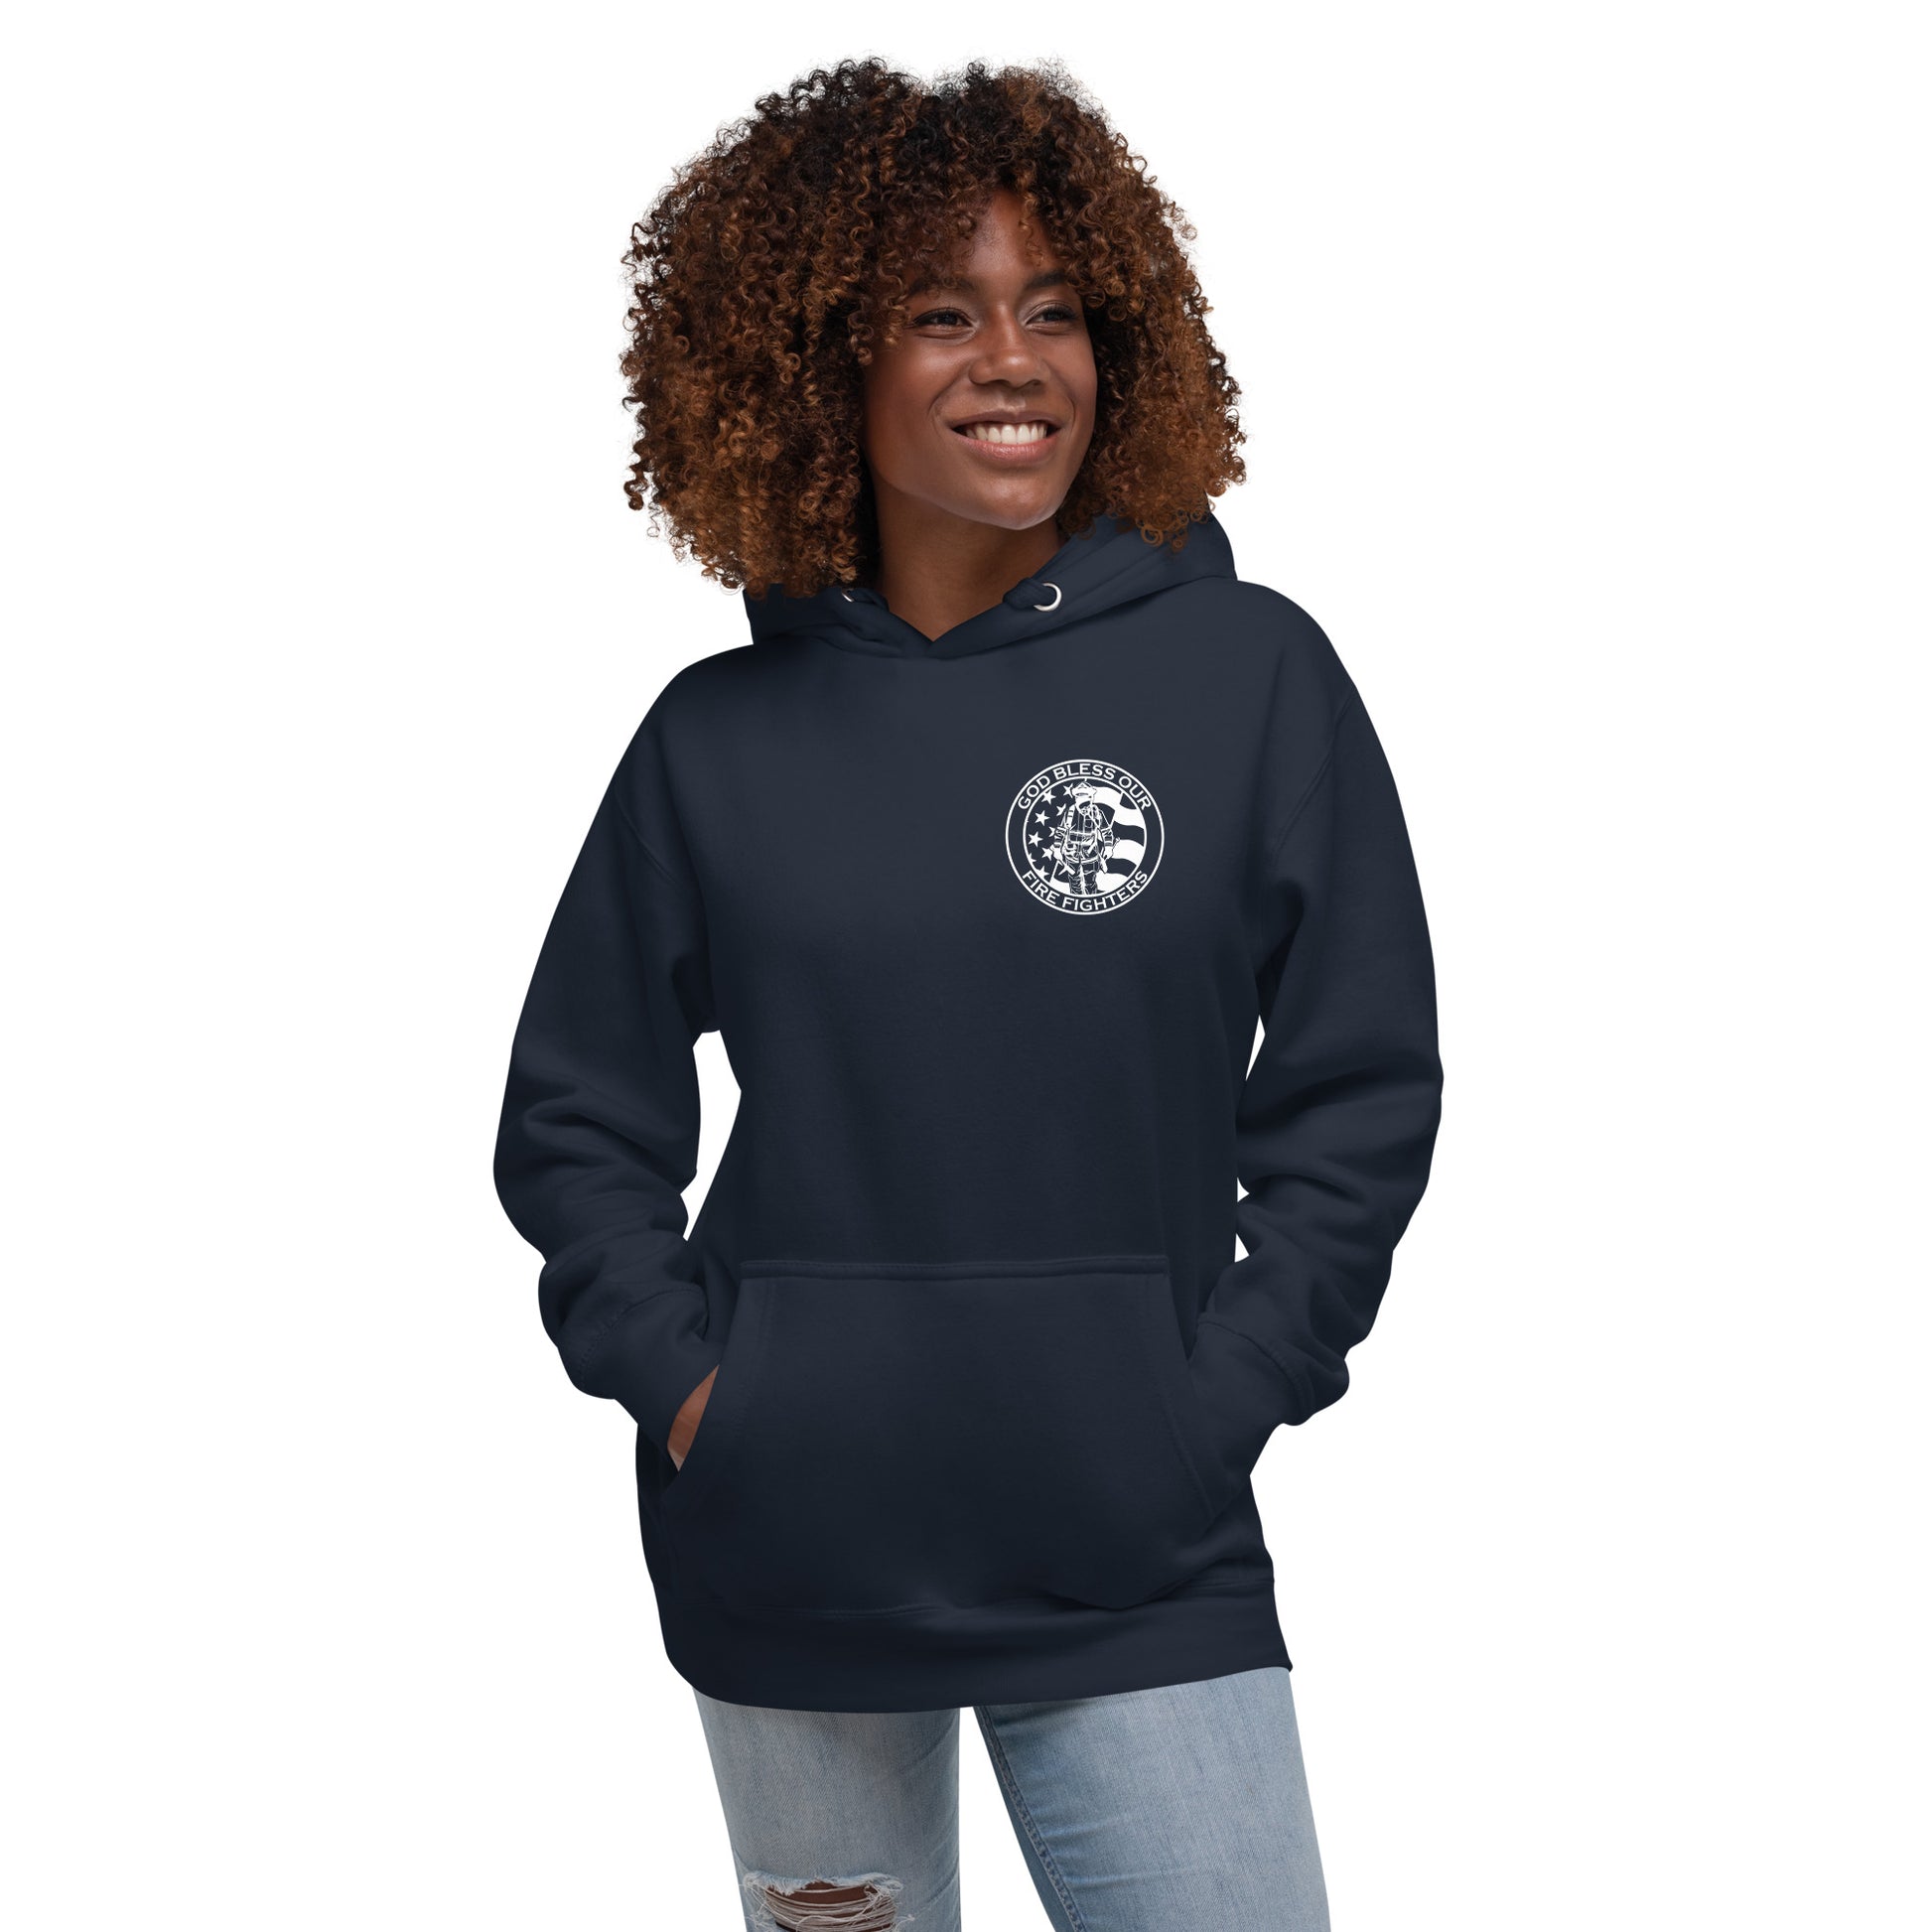 God Bless Firefighters and American Flag Premium Unisex Hoodie-911 Duty Gear USA-911 Duty Gear USA